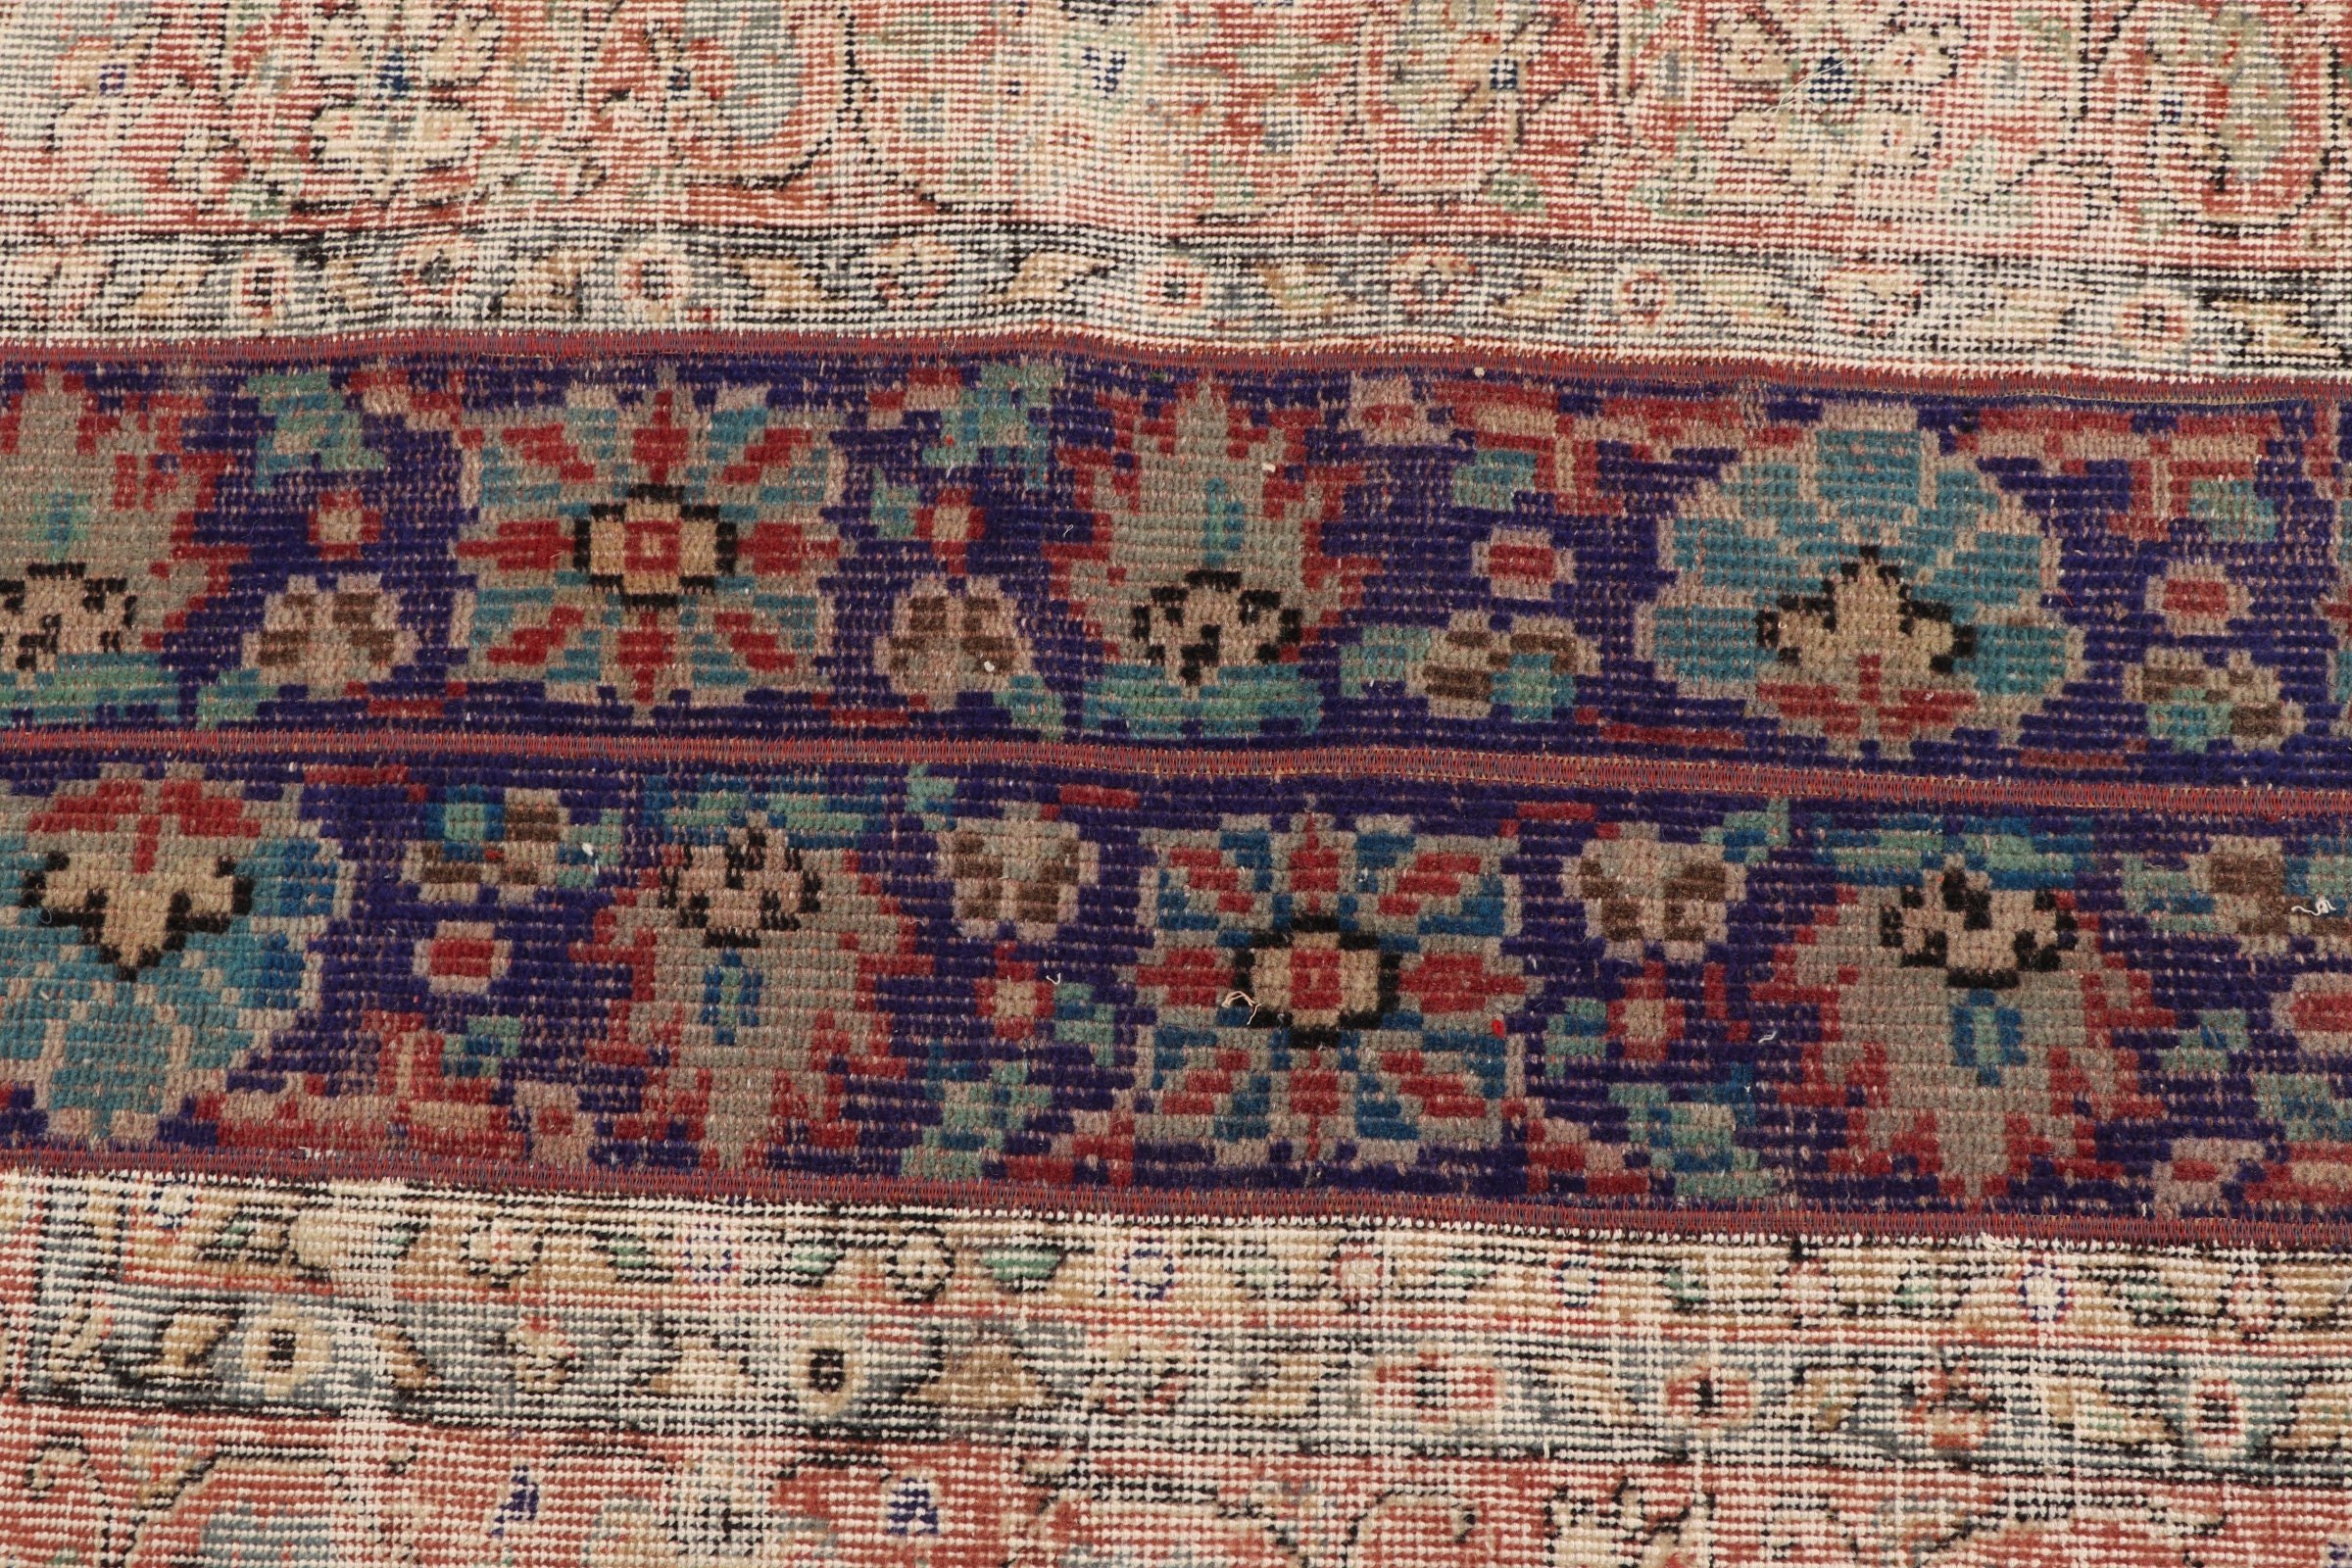 Kitchen Rugs, Turkish Rugs, Muted Rug, Bath Rug, 2.8x3.2 ft Small Rugs, Moroccan Rug, Vintage Rugs, Beige Anatolian Rugs, Oushak Rug